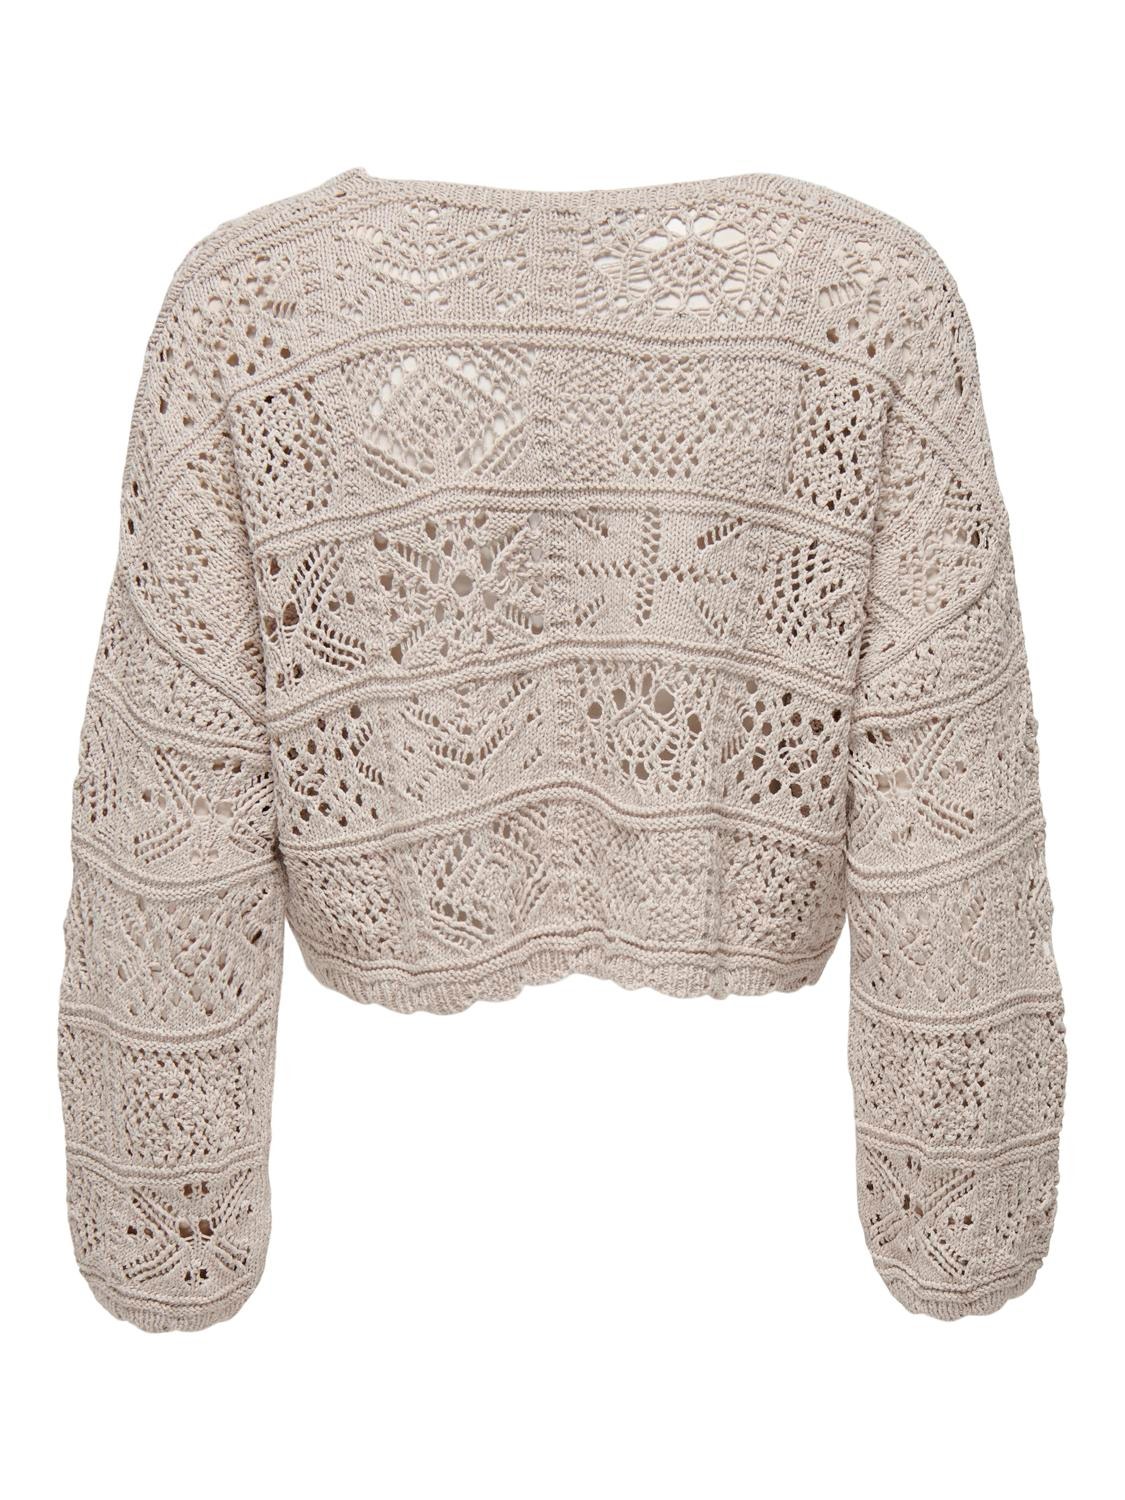 ONLY Knitted Cardigan -Pumice Stone - 15257604